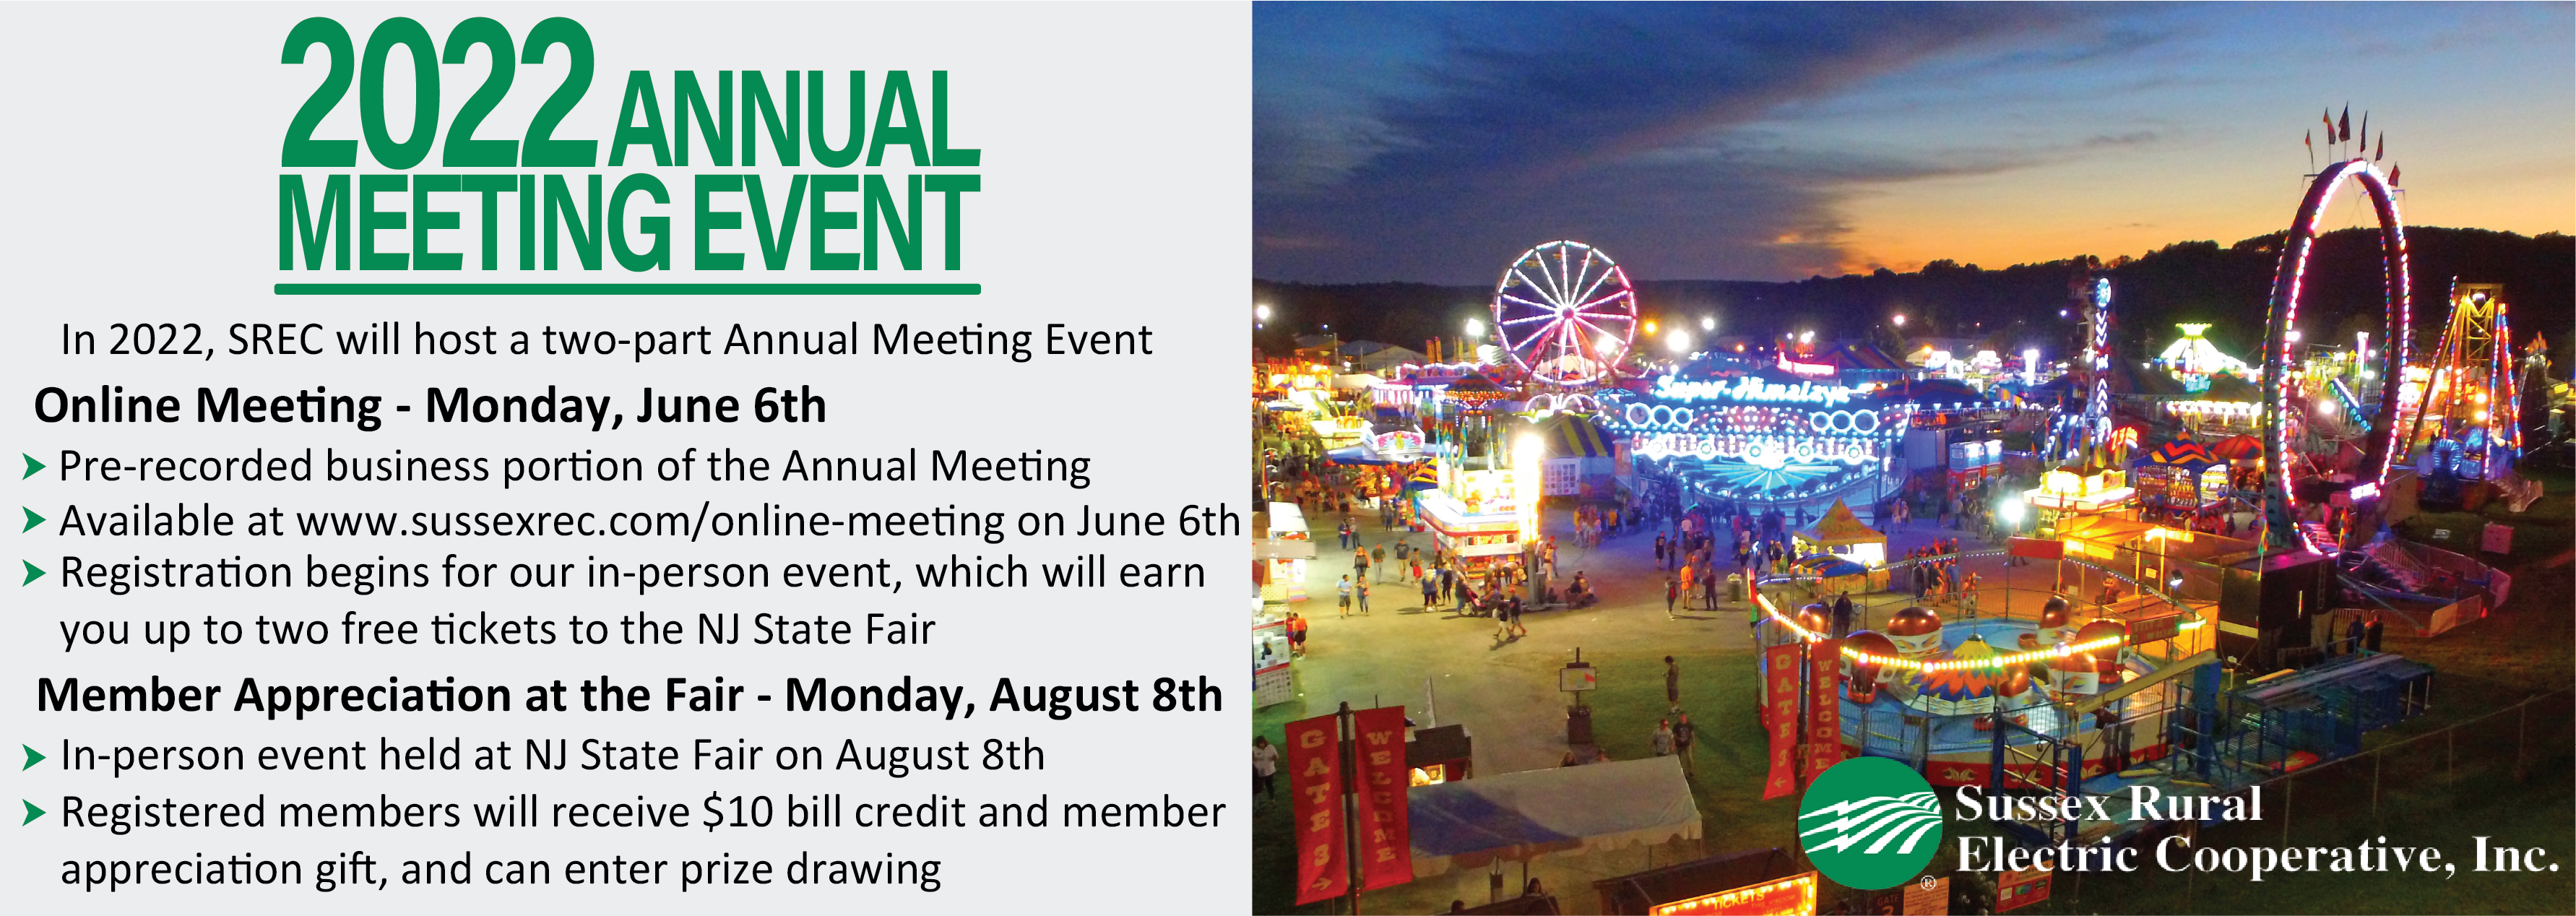 2022 ANNUAL MEETING EVENT: In 2022 SREC, will host a two-part Annual Meeting Event | Online Meeting - Monday, June 6th: *Pre-recorded business portion of the Annual Meeting *Available at www.sussexrec.com/online-meeting on June 6th *Registration begins for our in-person event, which will earn you up to two free tickets to the NJ State Fair | Member Appreciation at the Fair - Monday, August 8th: *In-person event held at NJ State Fair on August 8th *Registered members will receive $10 bill credit and member appreciation gift, and can enter prize drawing